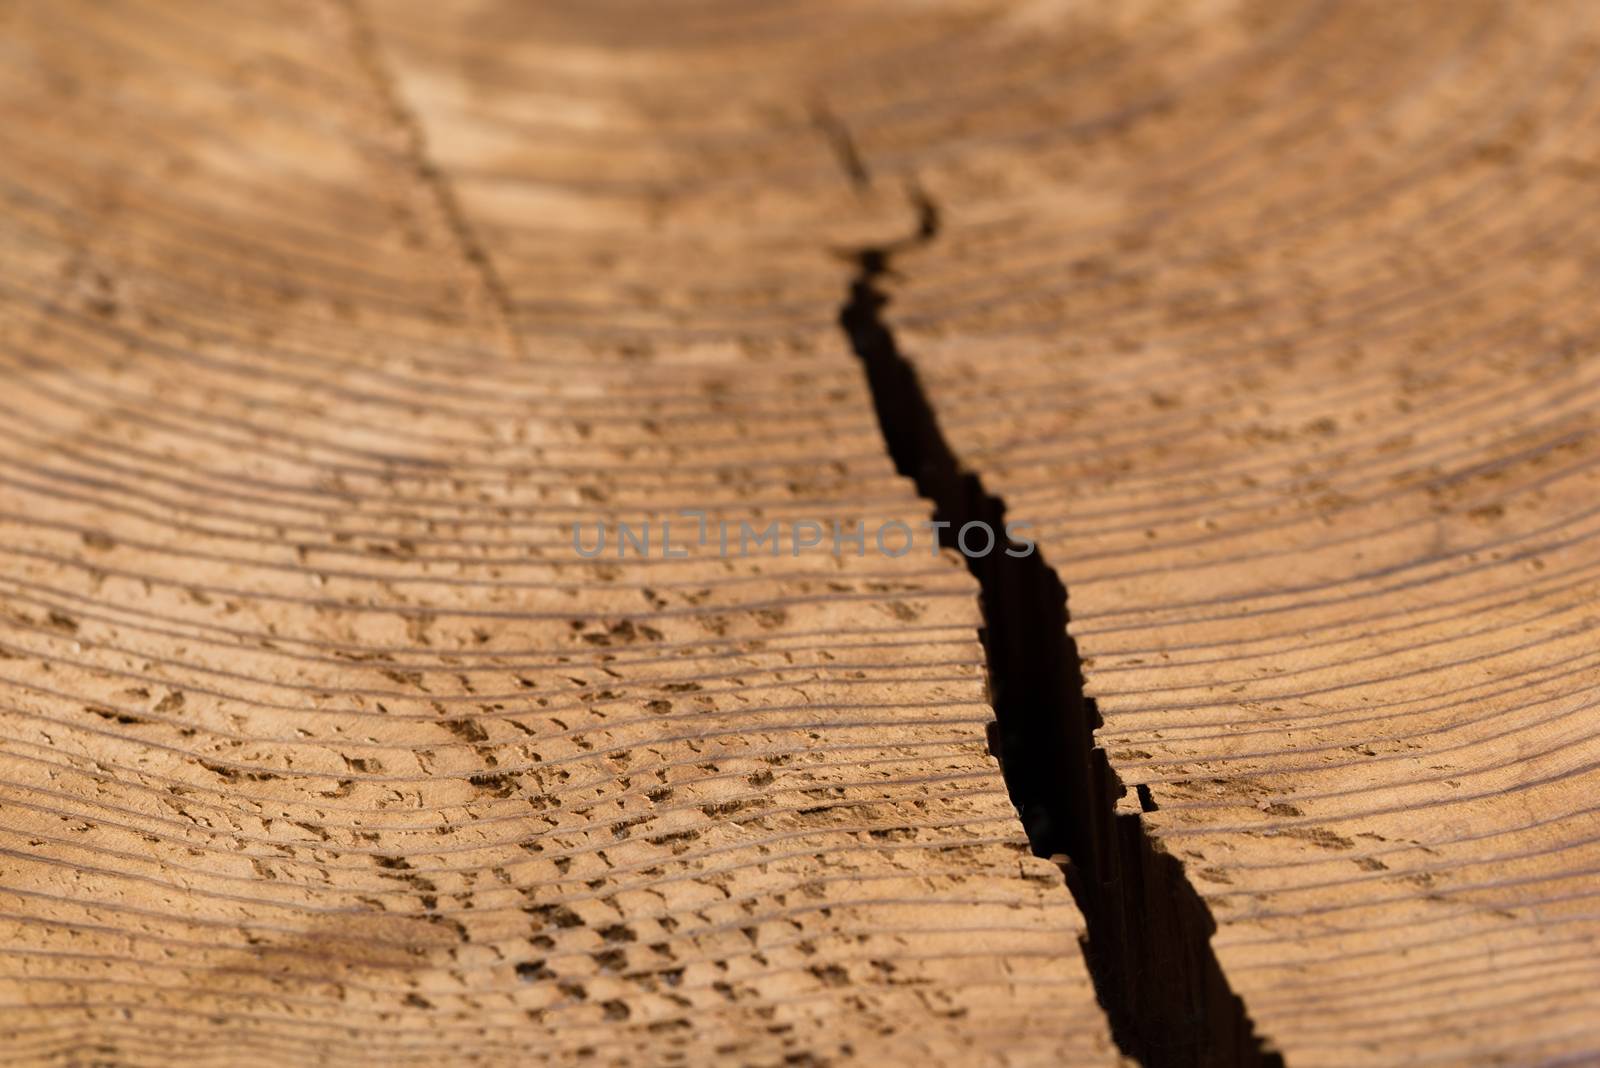 A close up shot of the texture and grain in a cut stump of a tree with a crack splitting it open from the side.